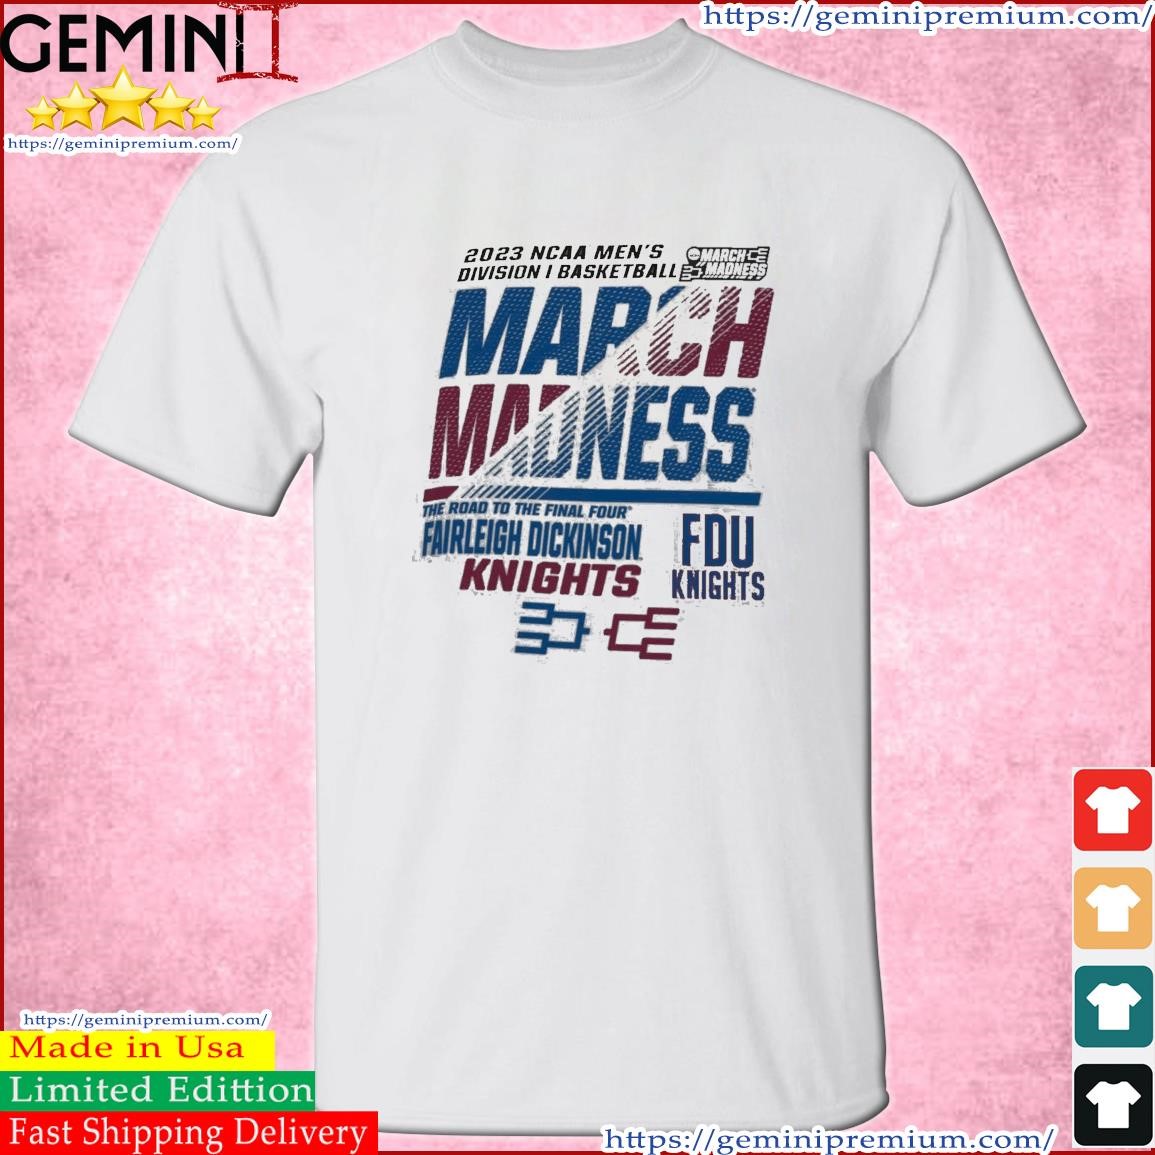 FDU Knights Men's Basketball 2023 NCAA March Madness The Road To Final Four Shirt